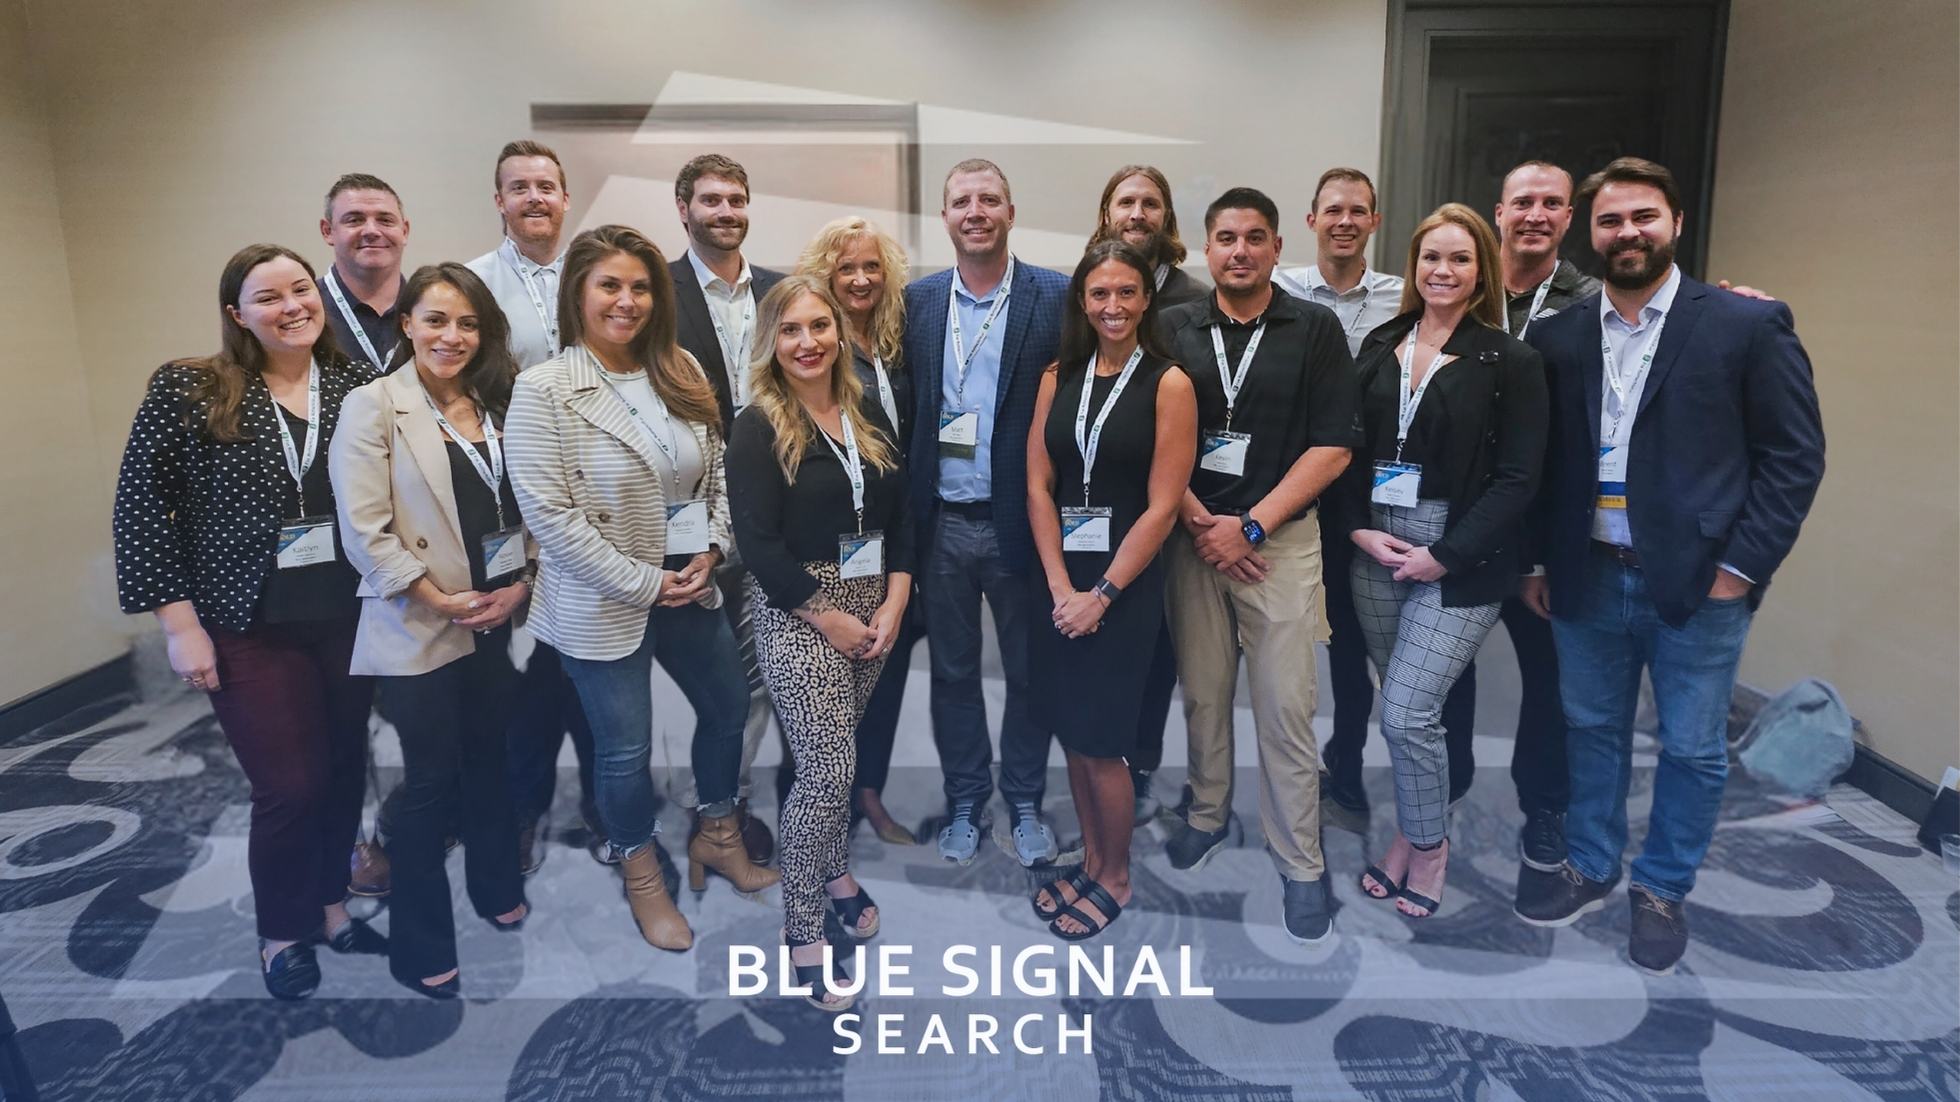 Group photo of the Blue Signal Search recruiting team at the NAPS 2023 Conference, with team members smiling and posing in professional attire, showcasing the company's collaborative spirit.